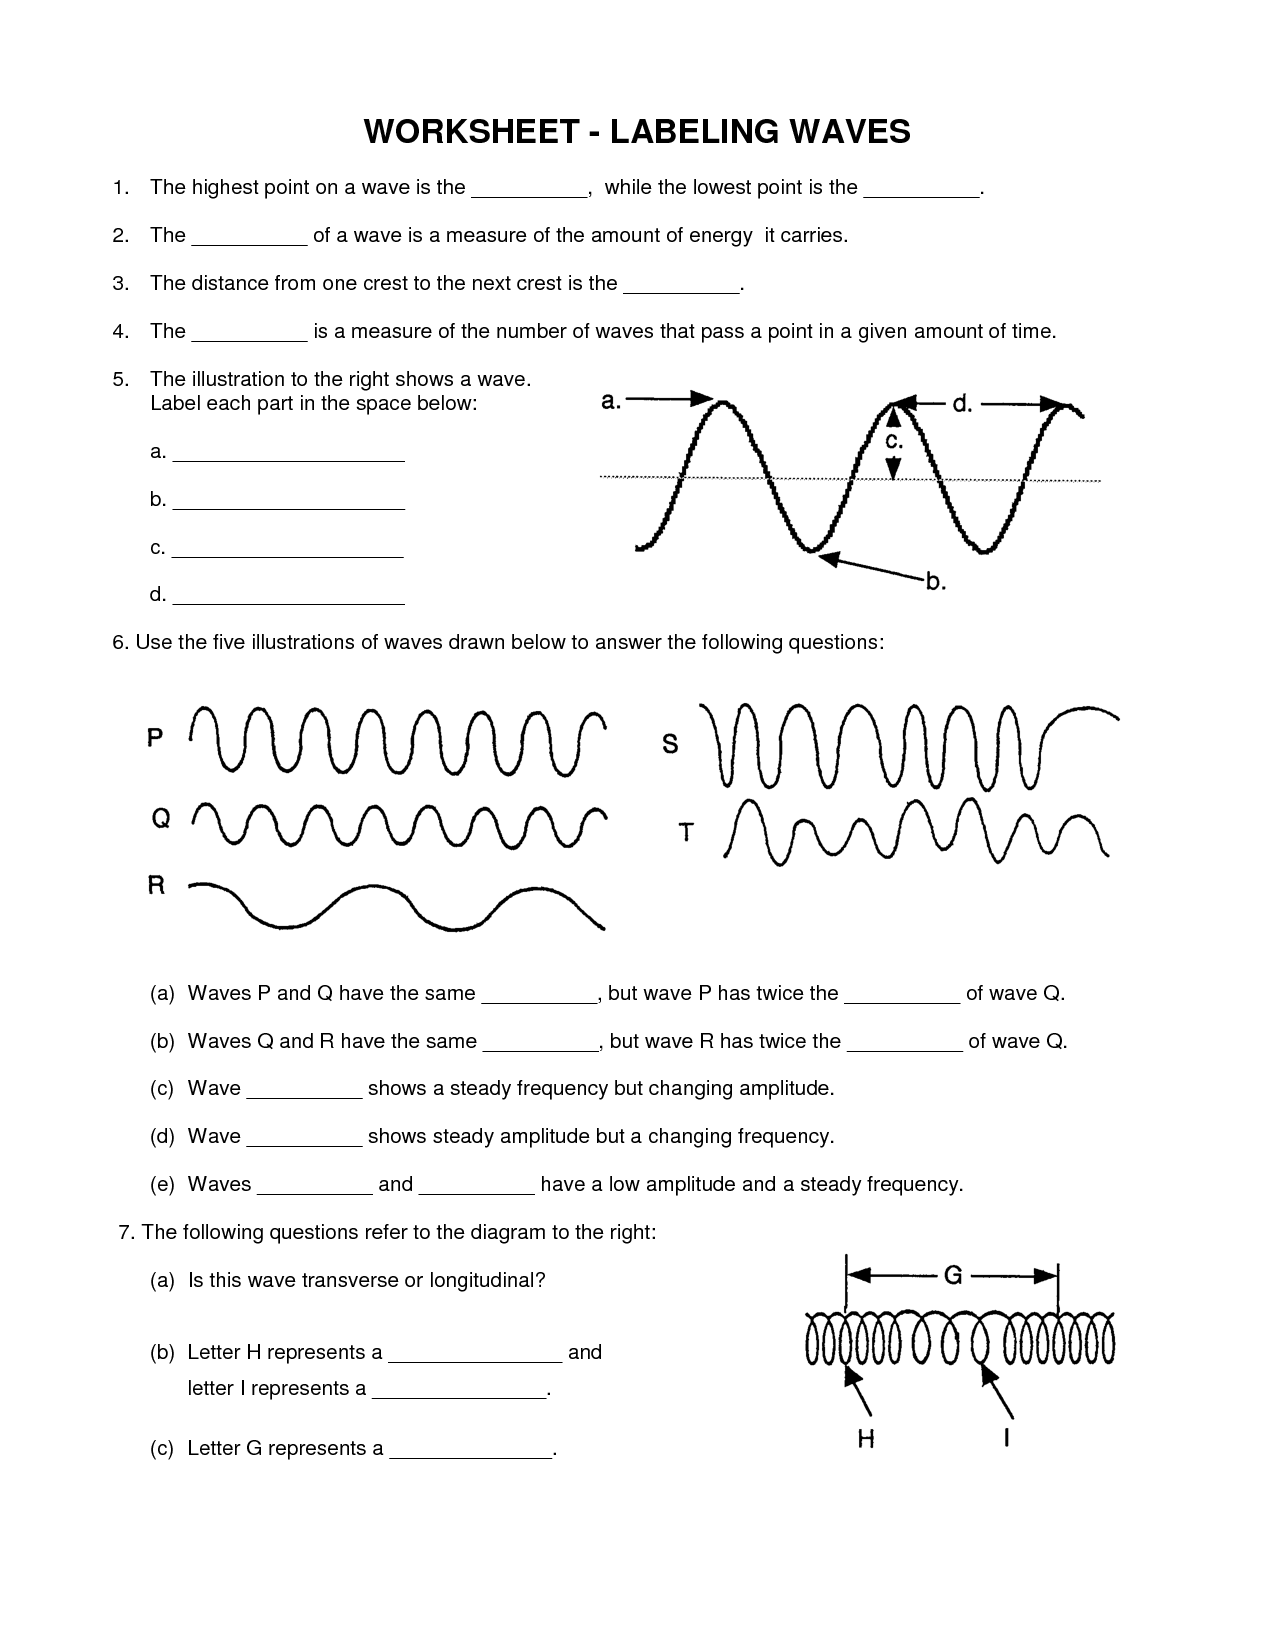 10 Images of Physics Worksheets With Answer Key